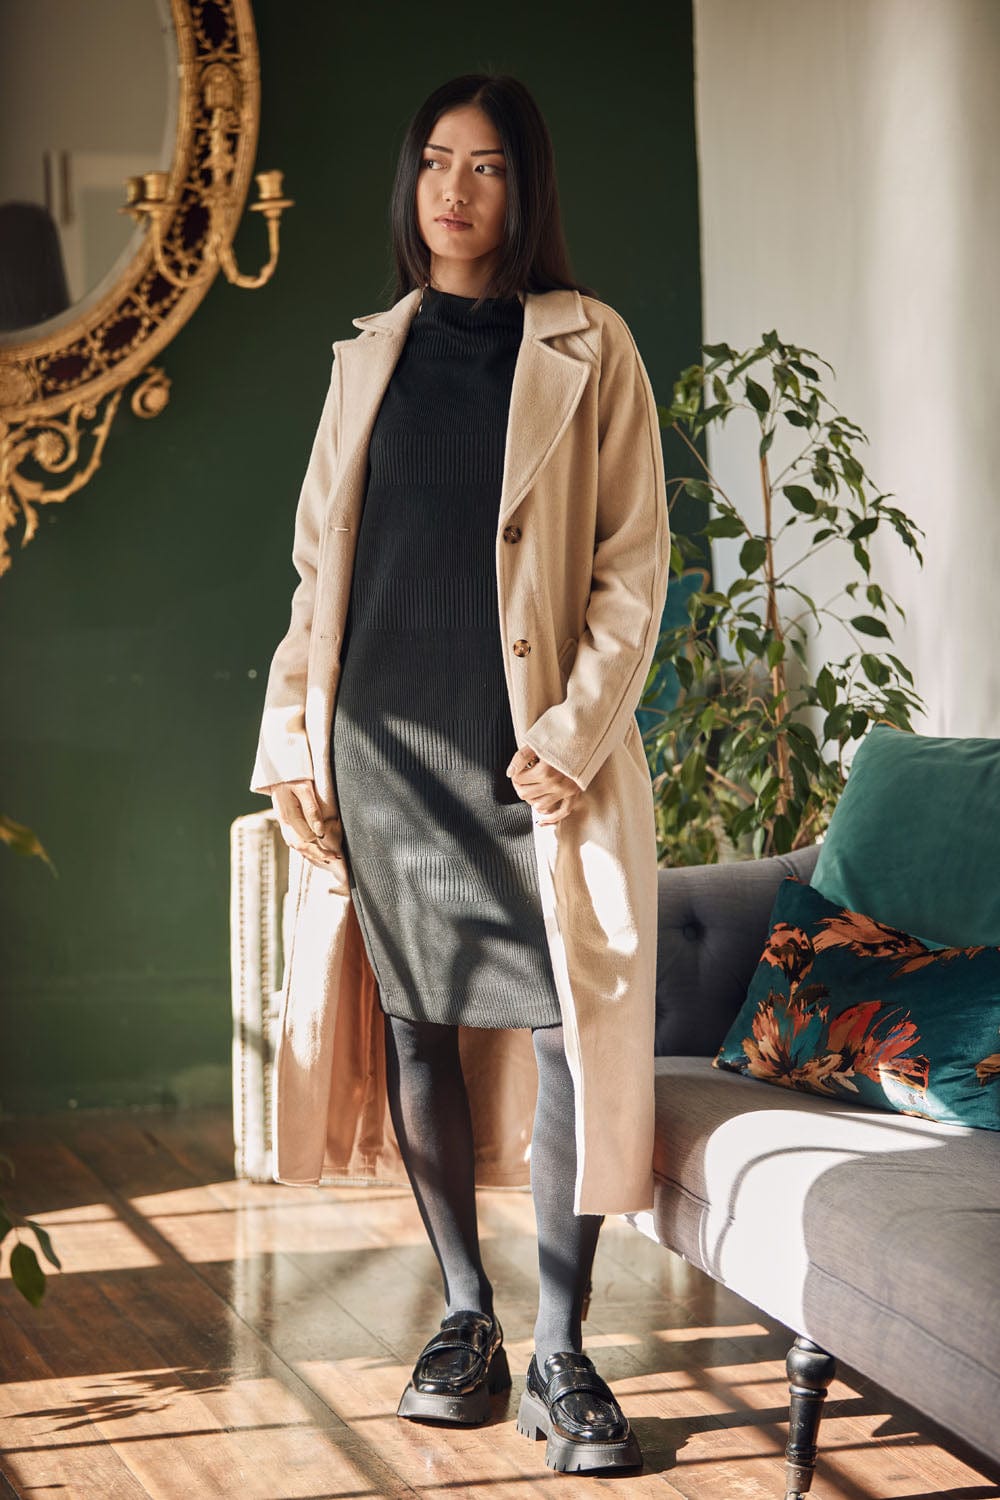 Soyaconcept Classic Belted Coat